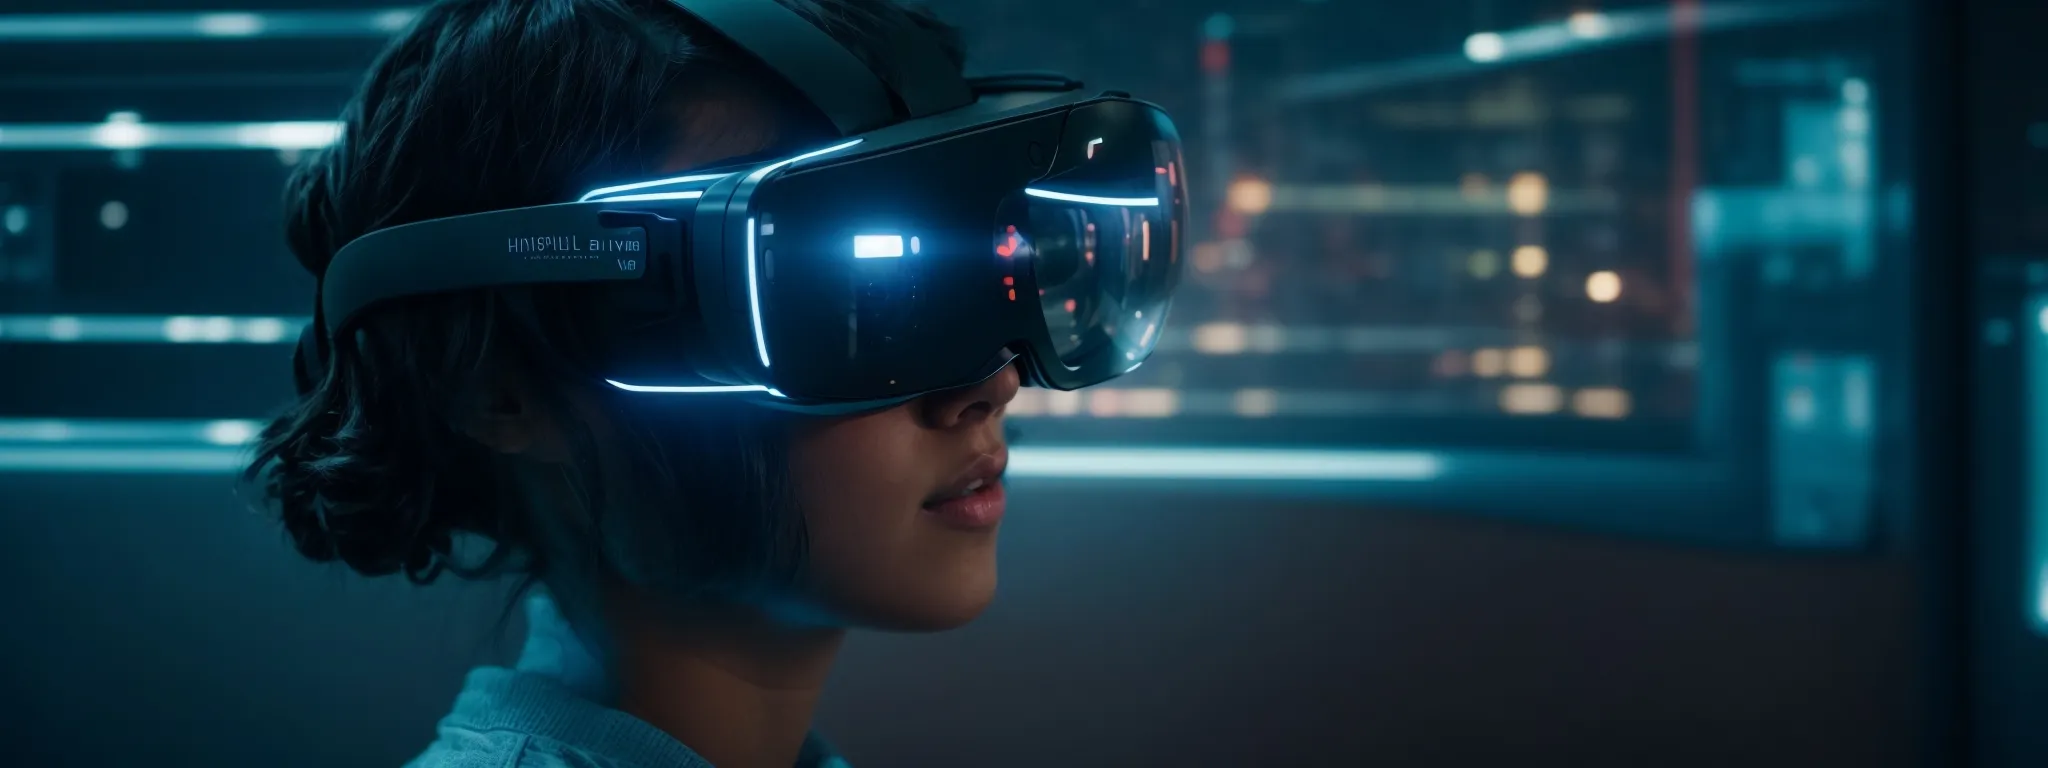 a person wearing vr glasses immersed in a futuristic digital interface while interacting with a holographic display.